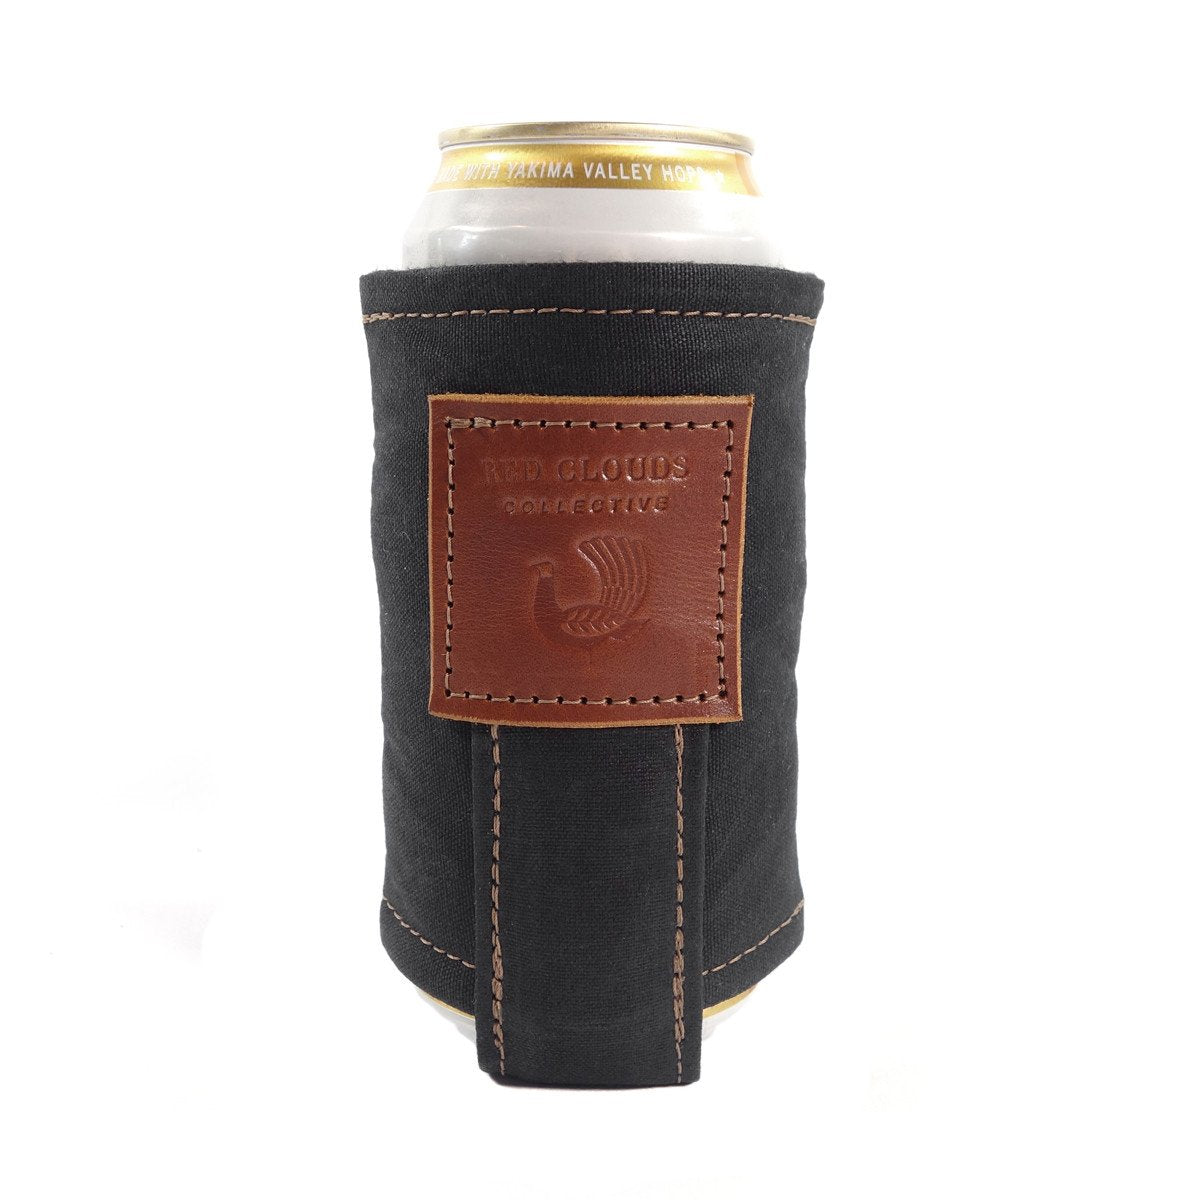 Leather Koozie - Black - Red Clouds Collective - Made in the USA